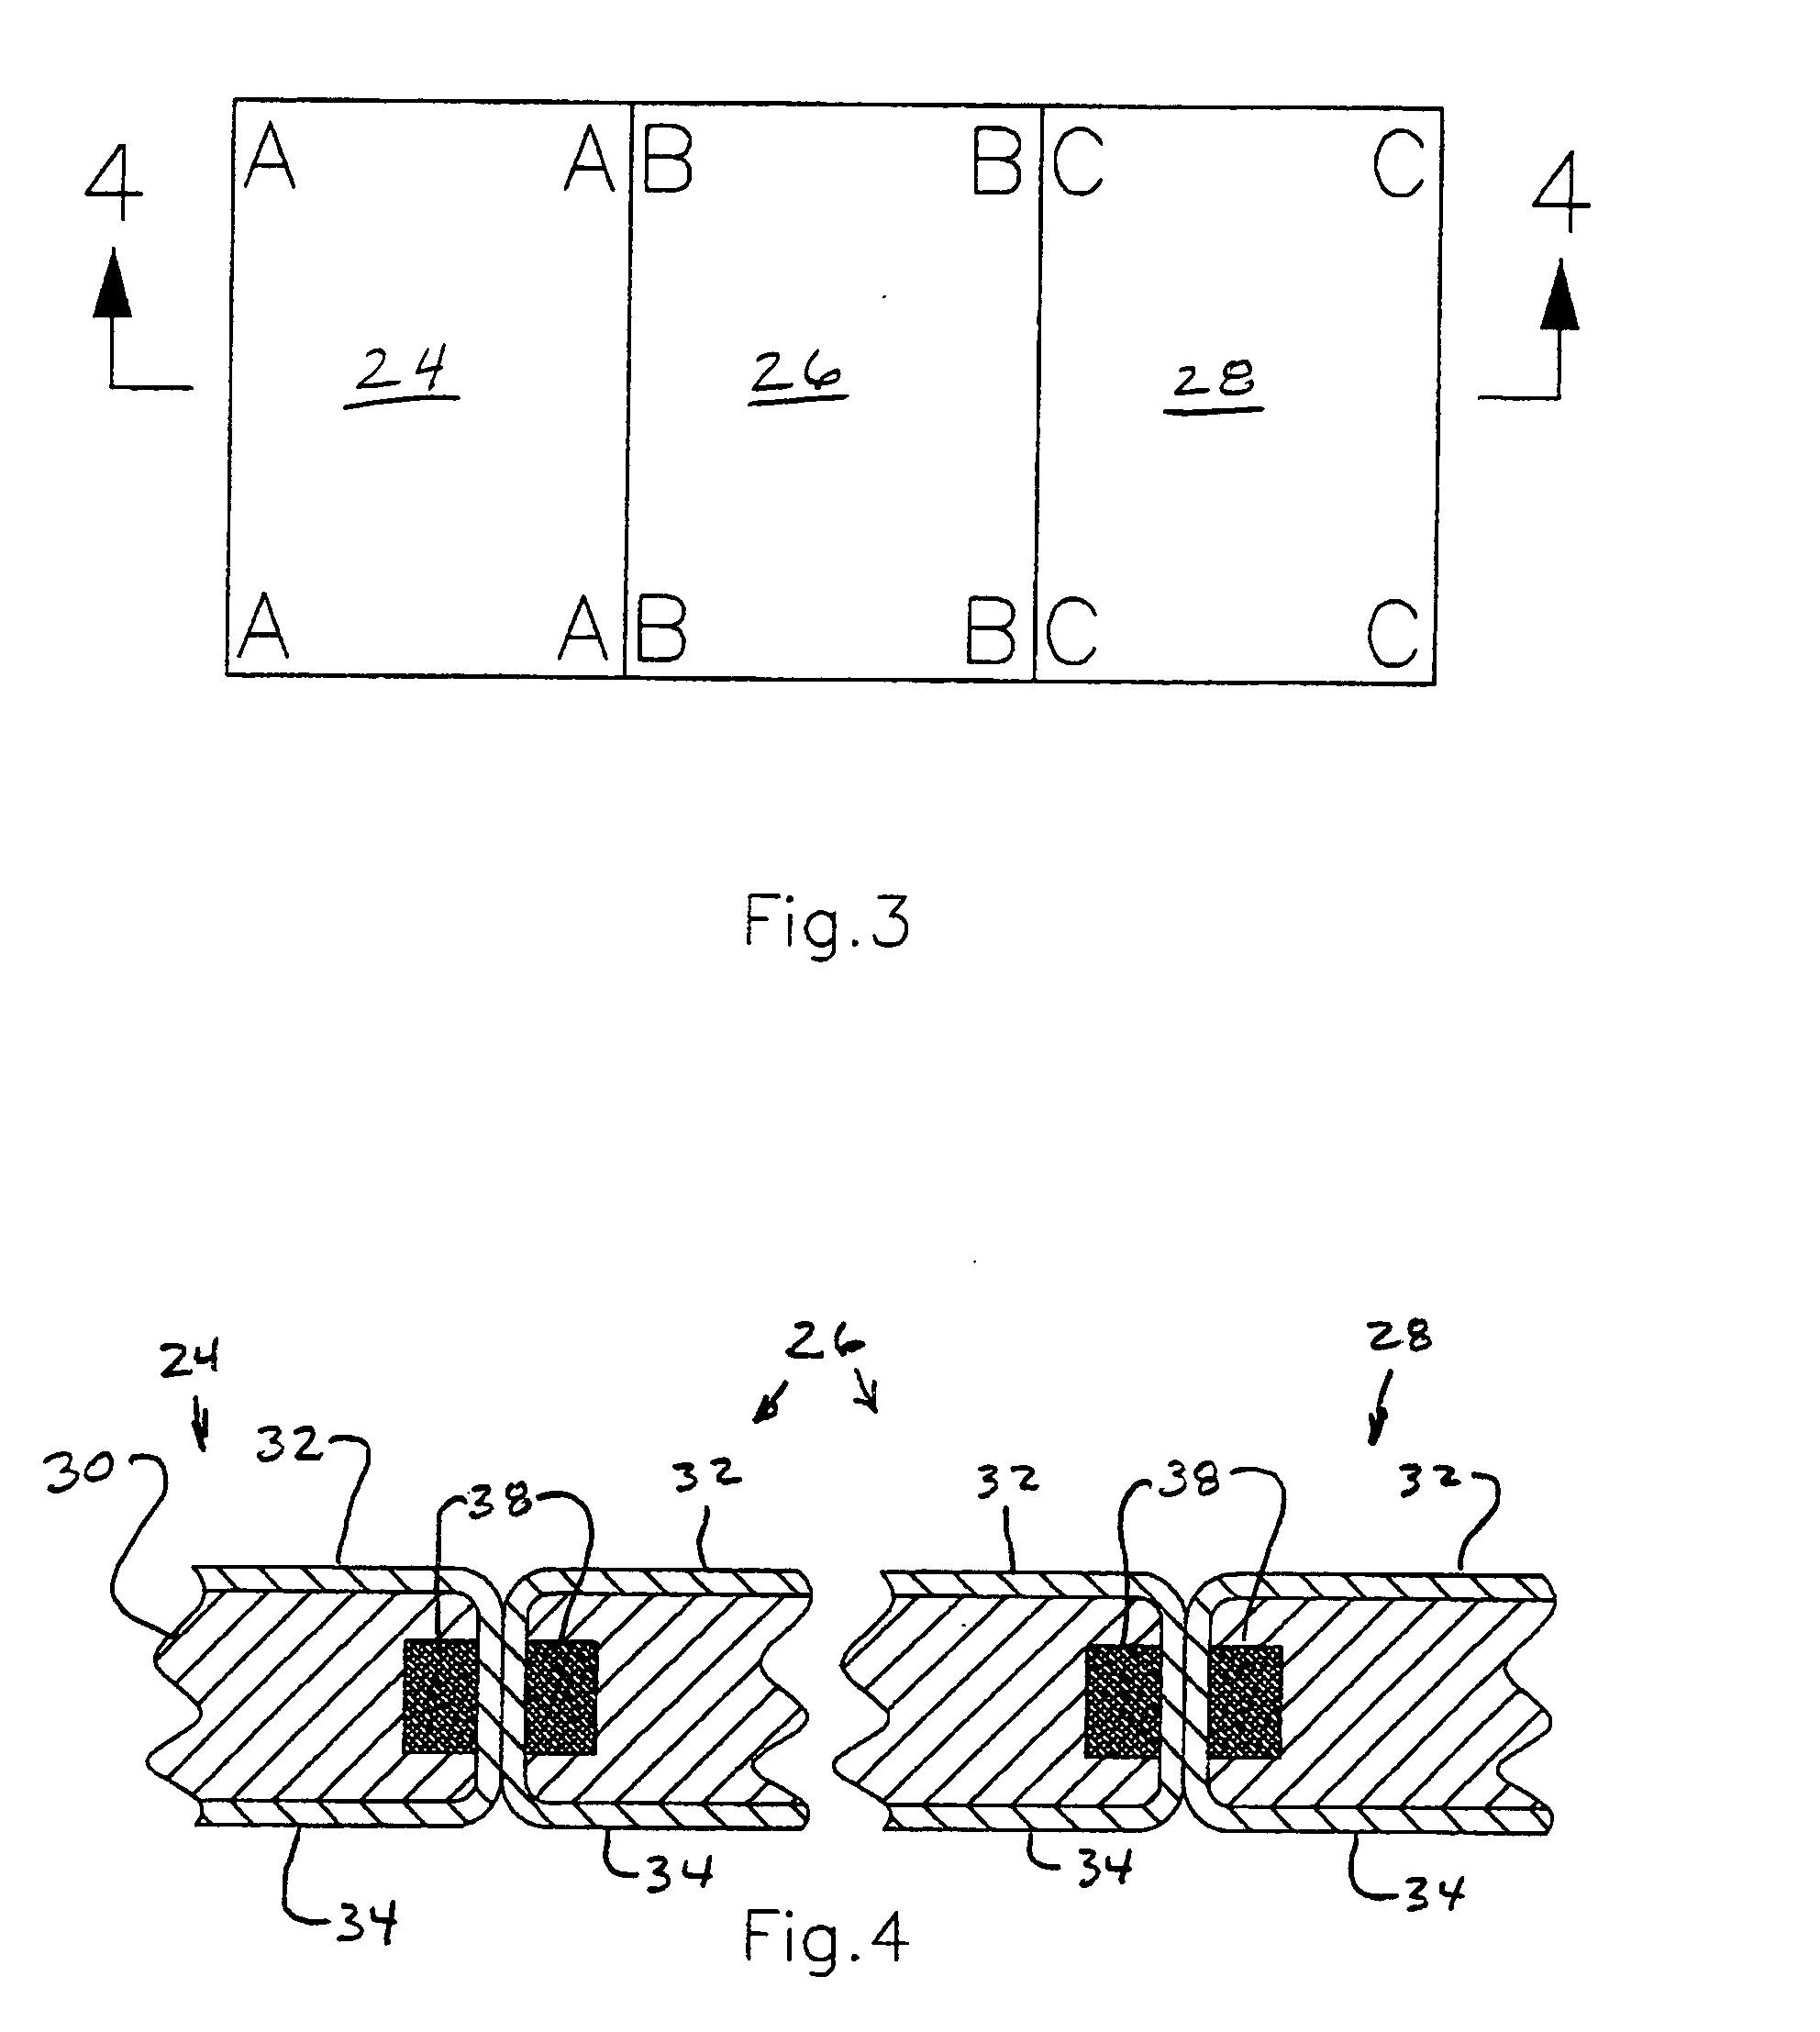 Table pad coupling system